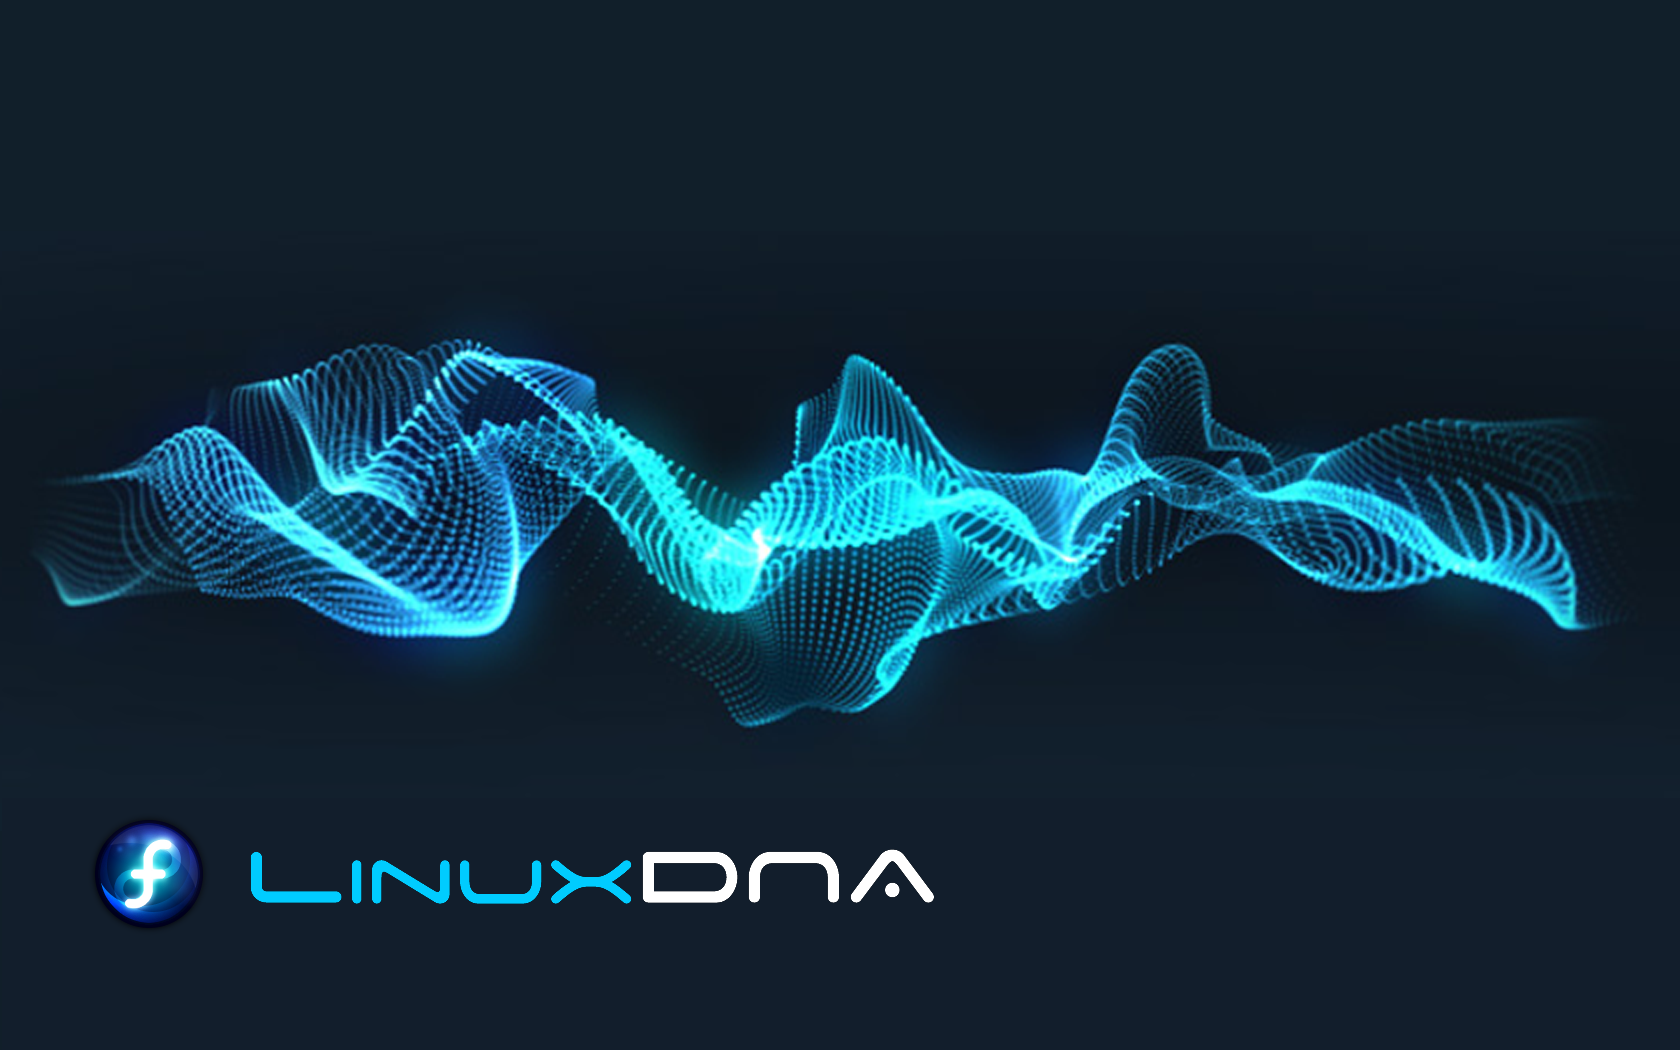 Linux DNA Fedora HD Wallpaper Picture Image For Your PC Desktop